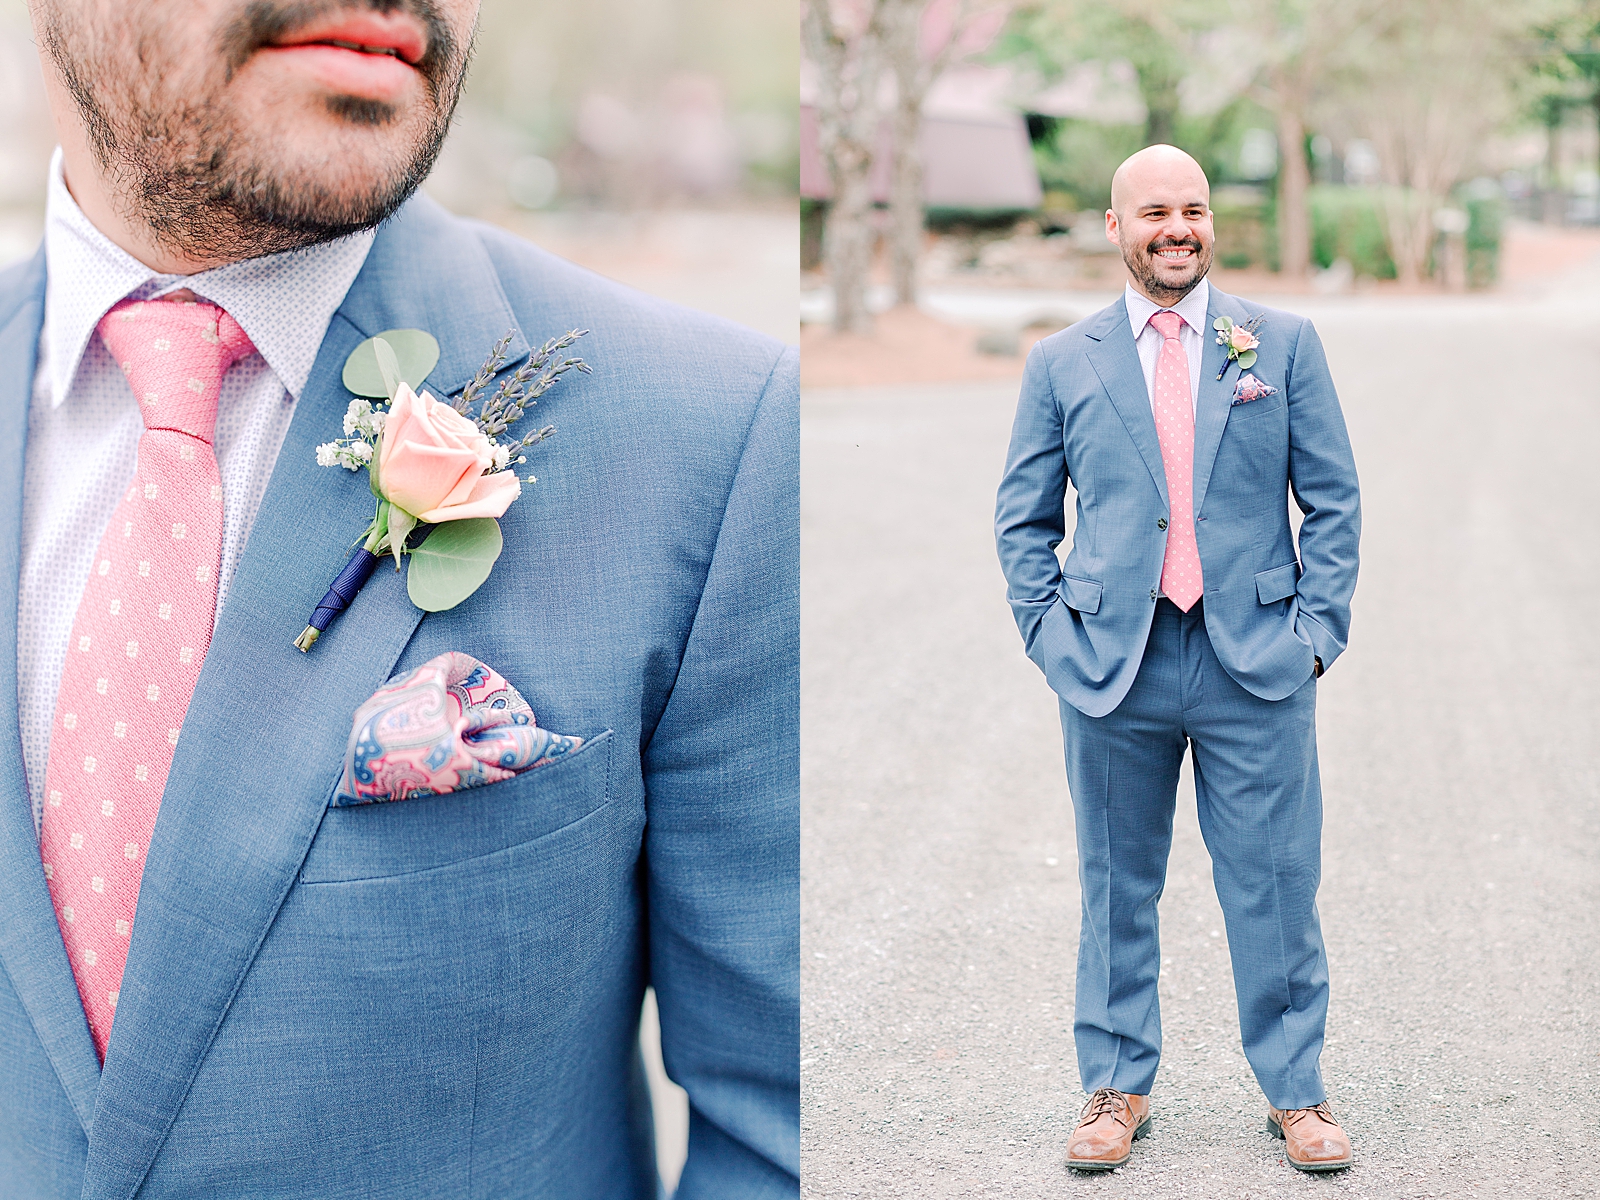 Spring Hawkesdene Wedding Detail of grooms tie boutonniere and pocket square and groom smiling Photos